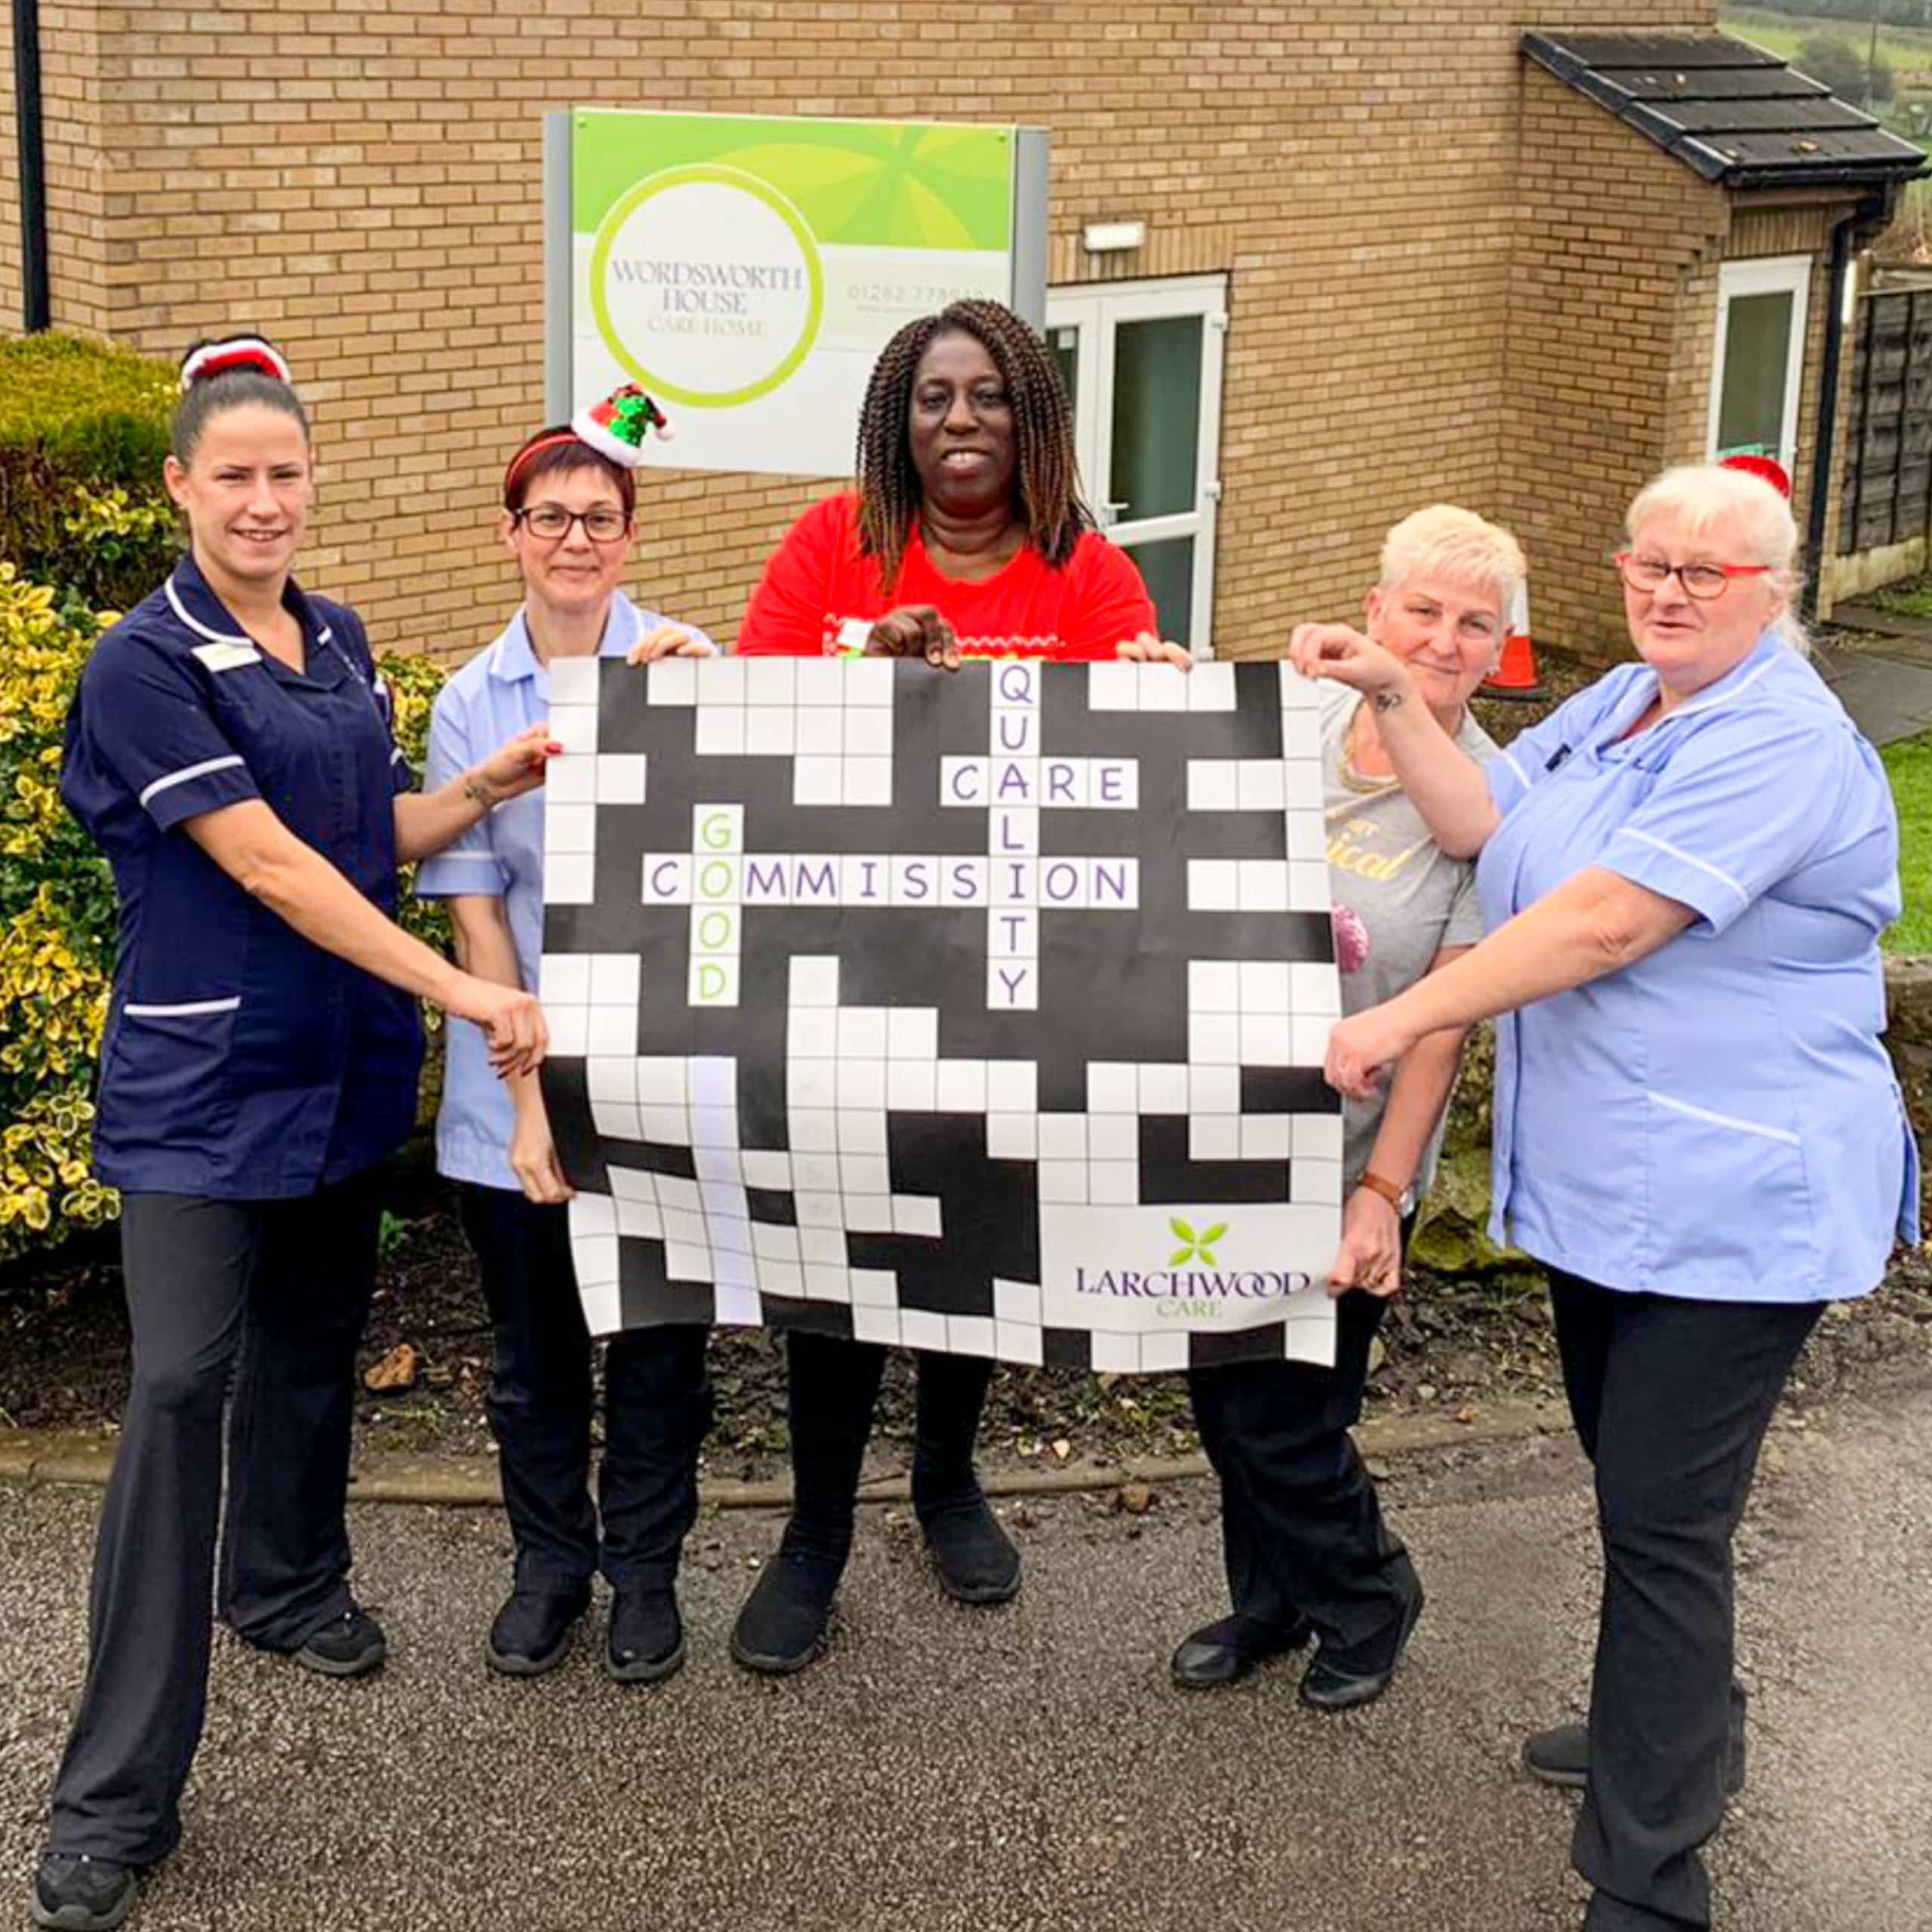 The team at Wordsworth House Care Home in Hapton near Burnley pose with the 'Good' CQC rating banner.